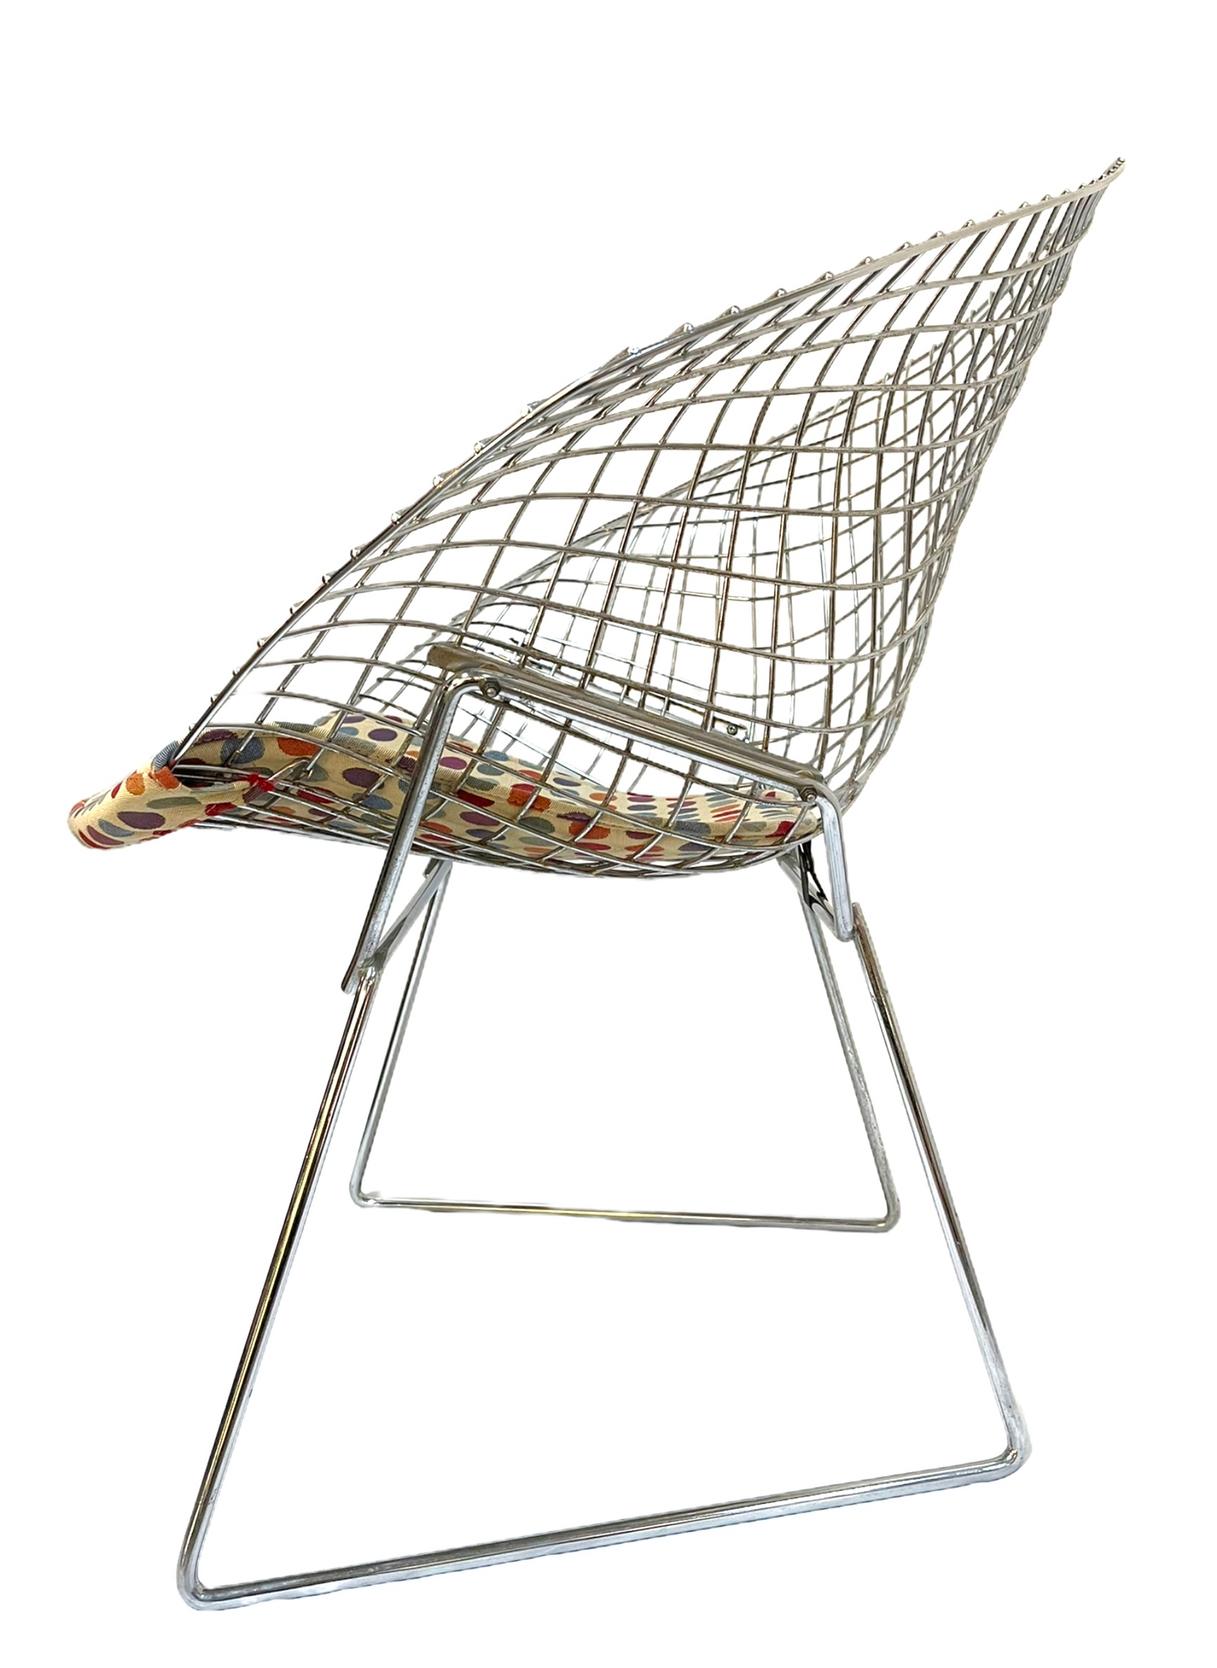 In the style of Harry Bertoia Diamond chair. Seat pad made from custom reupholstered vintage fabric. Thought to be an original from the period, but cannot find a maker marking. 

Sculptural form and a canted seat back make the Bertoia Diamond